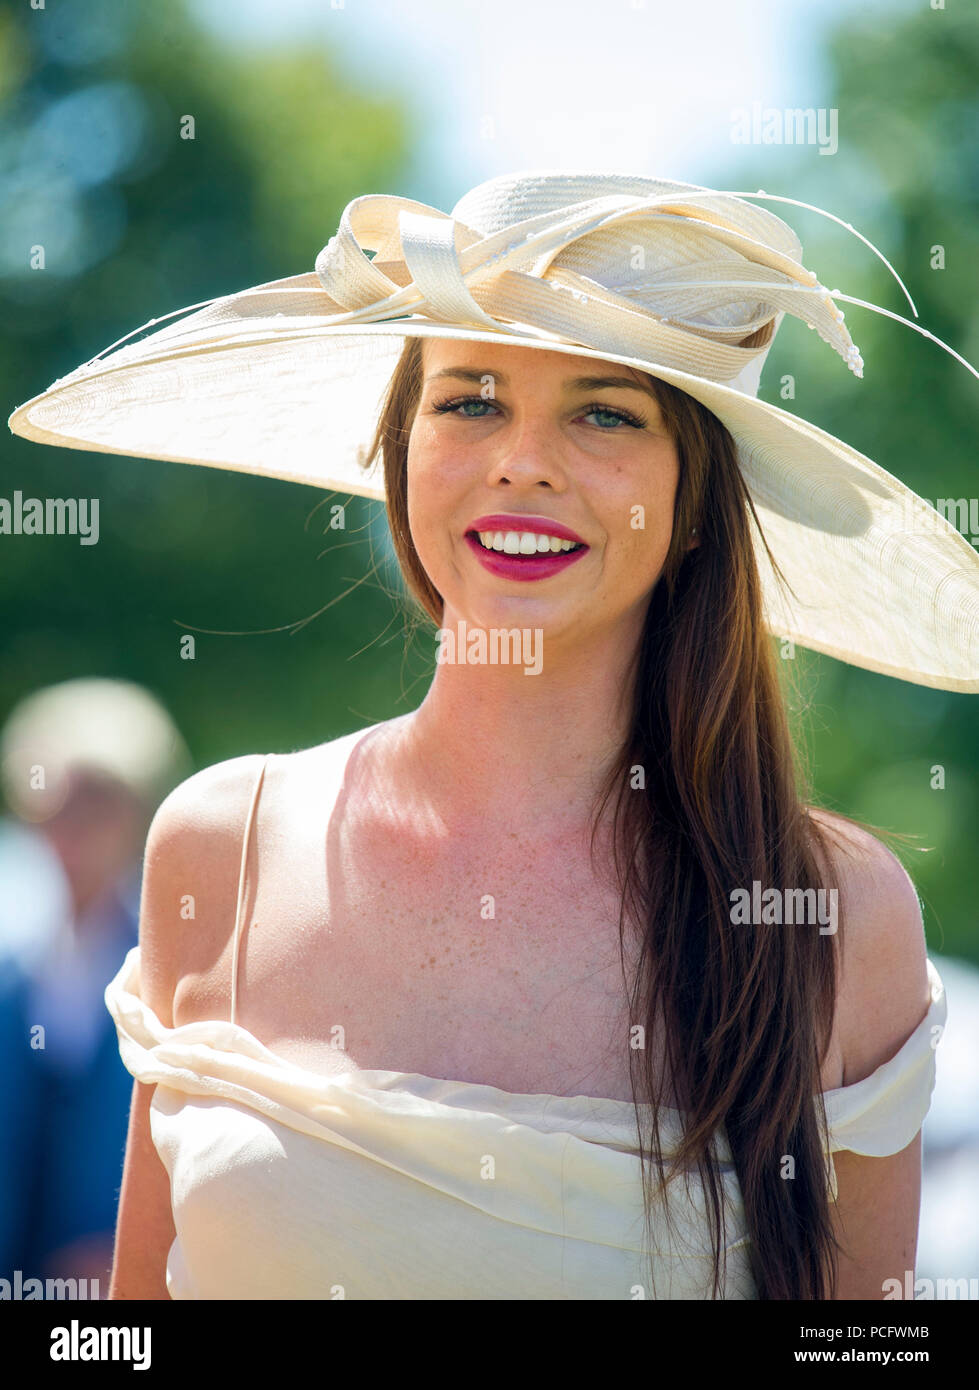 Goodwood, UK, 2 August 2018 Hats on display during Ladies' Day at Glorious Goodwood. Credit John Beasley/Alamy Live News Stock Photo